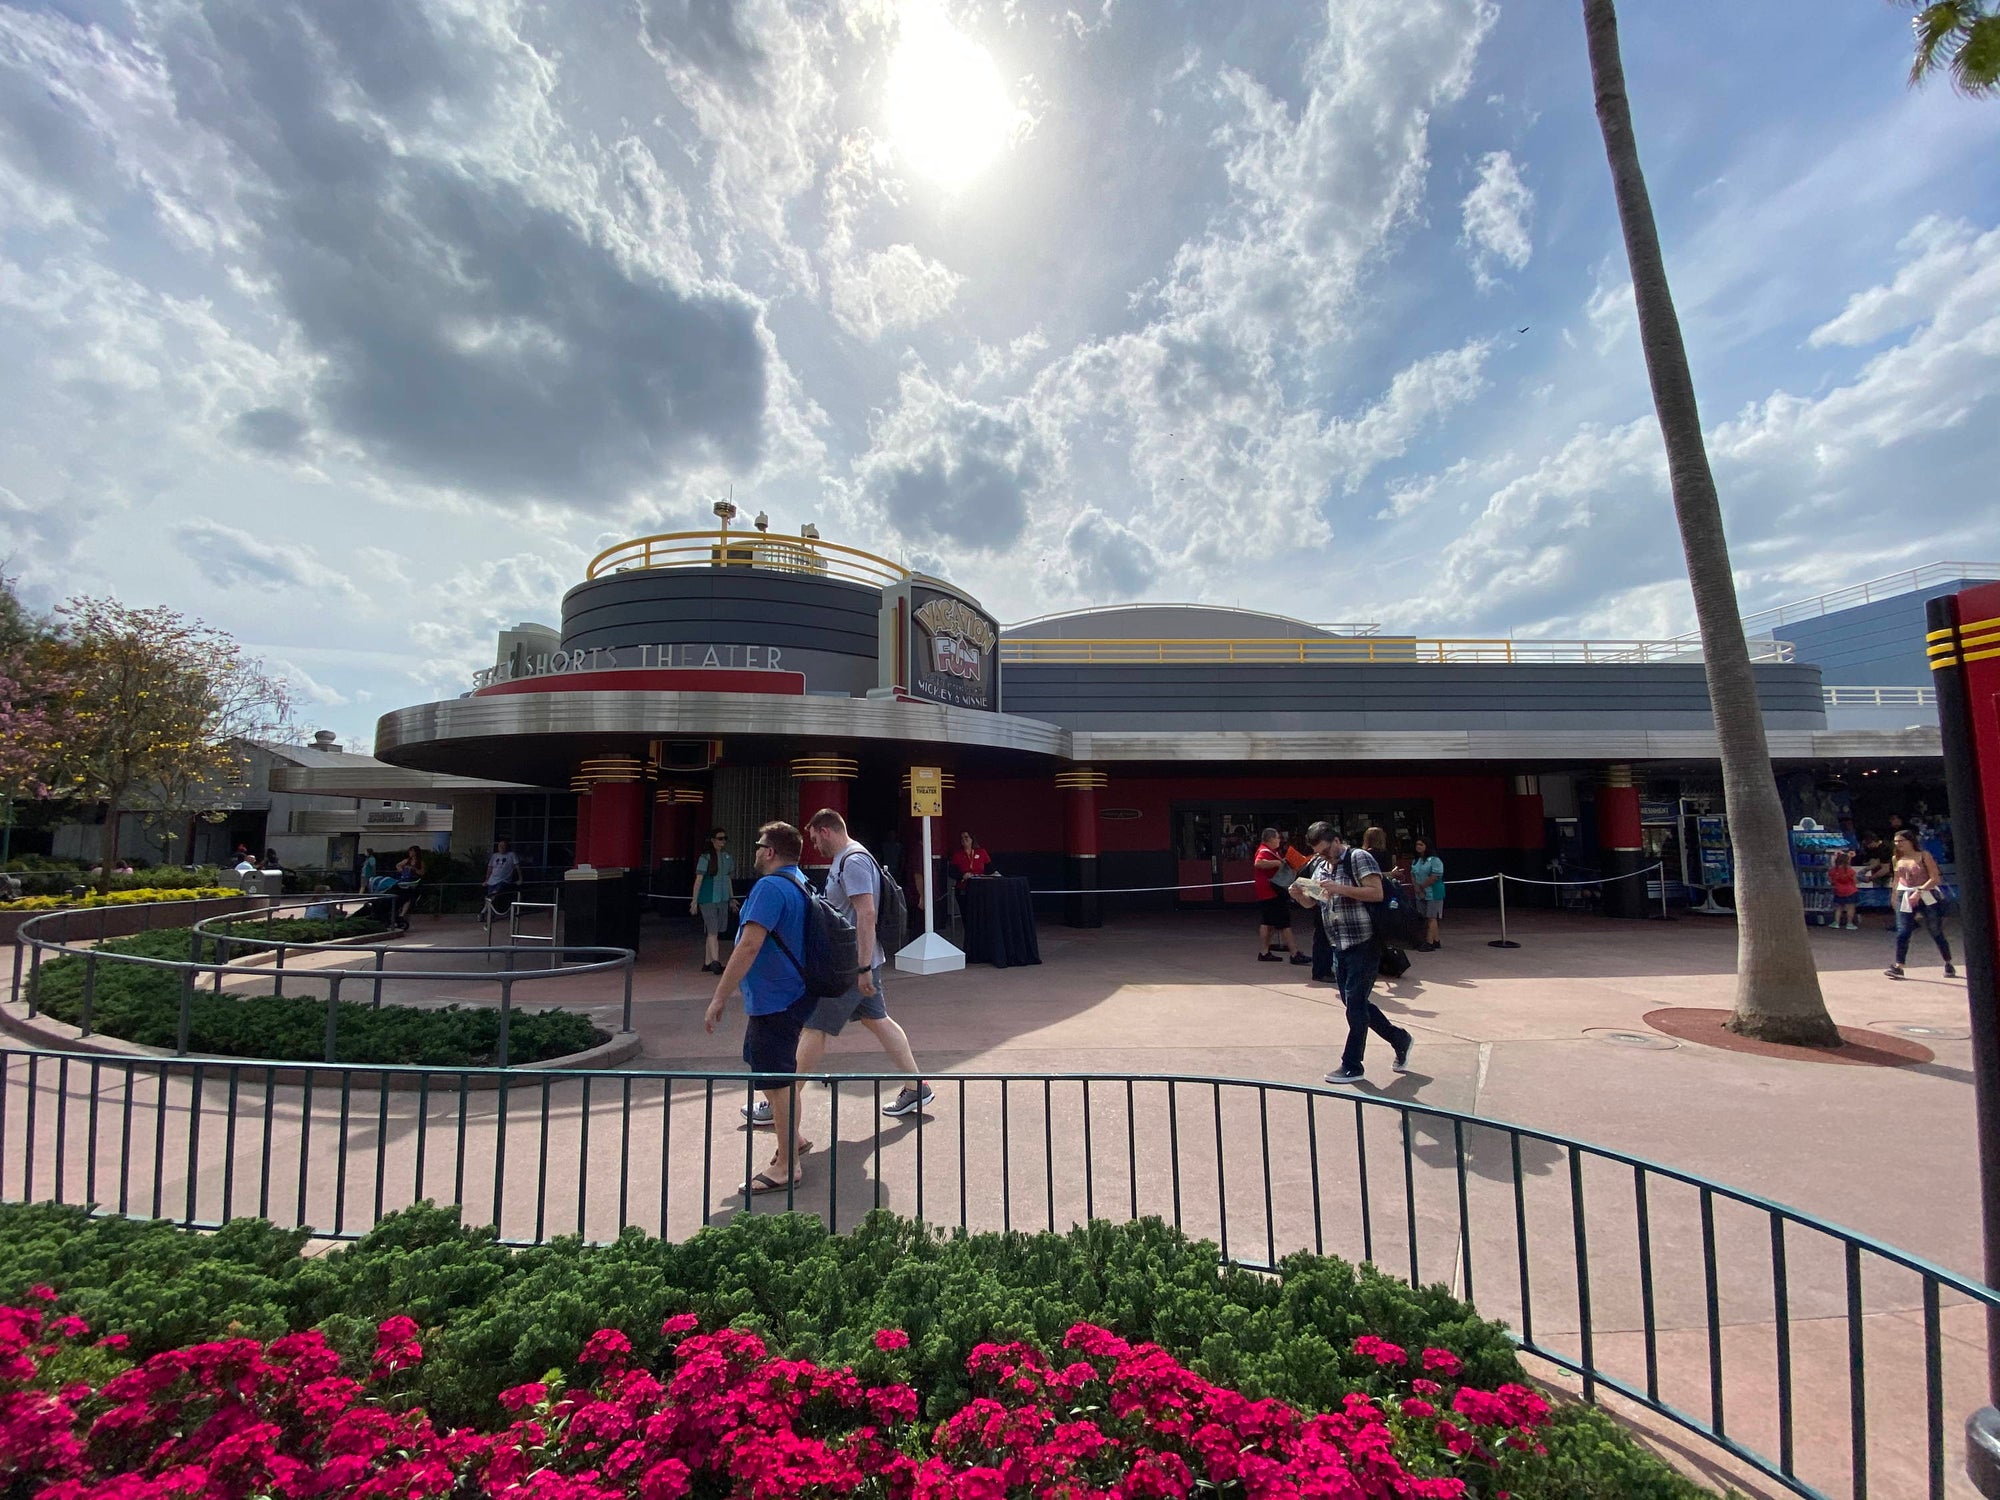 Construction Walls Down Around Mickey Shorts Theater Revealing Exterior and Potatoland Photo Op